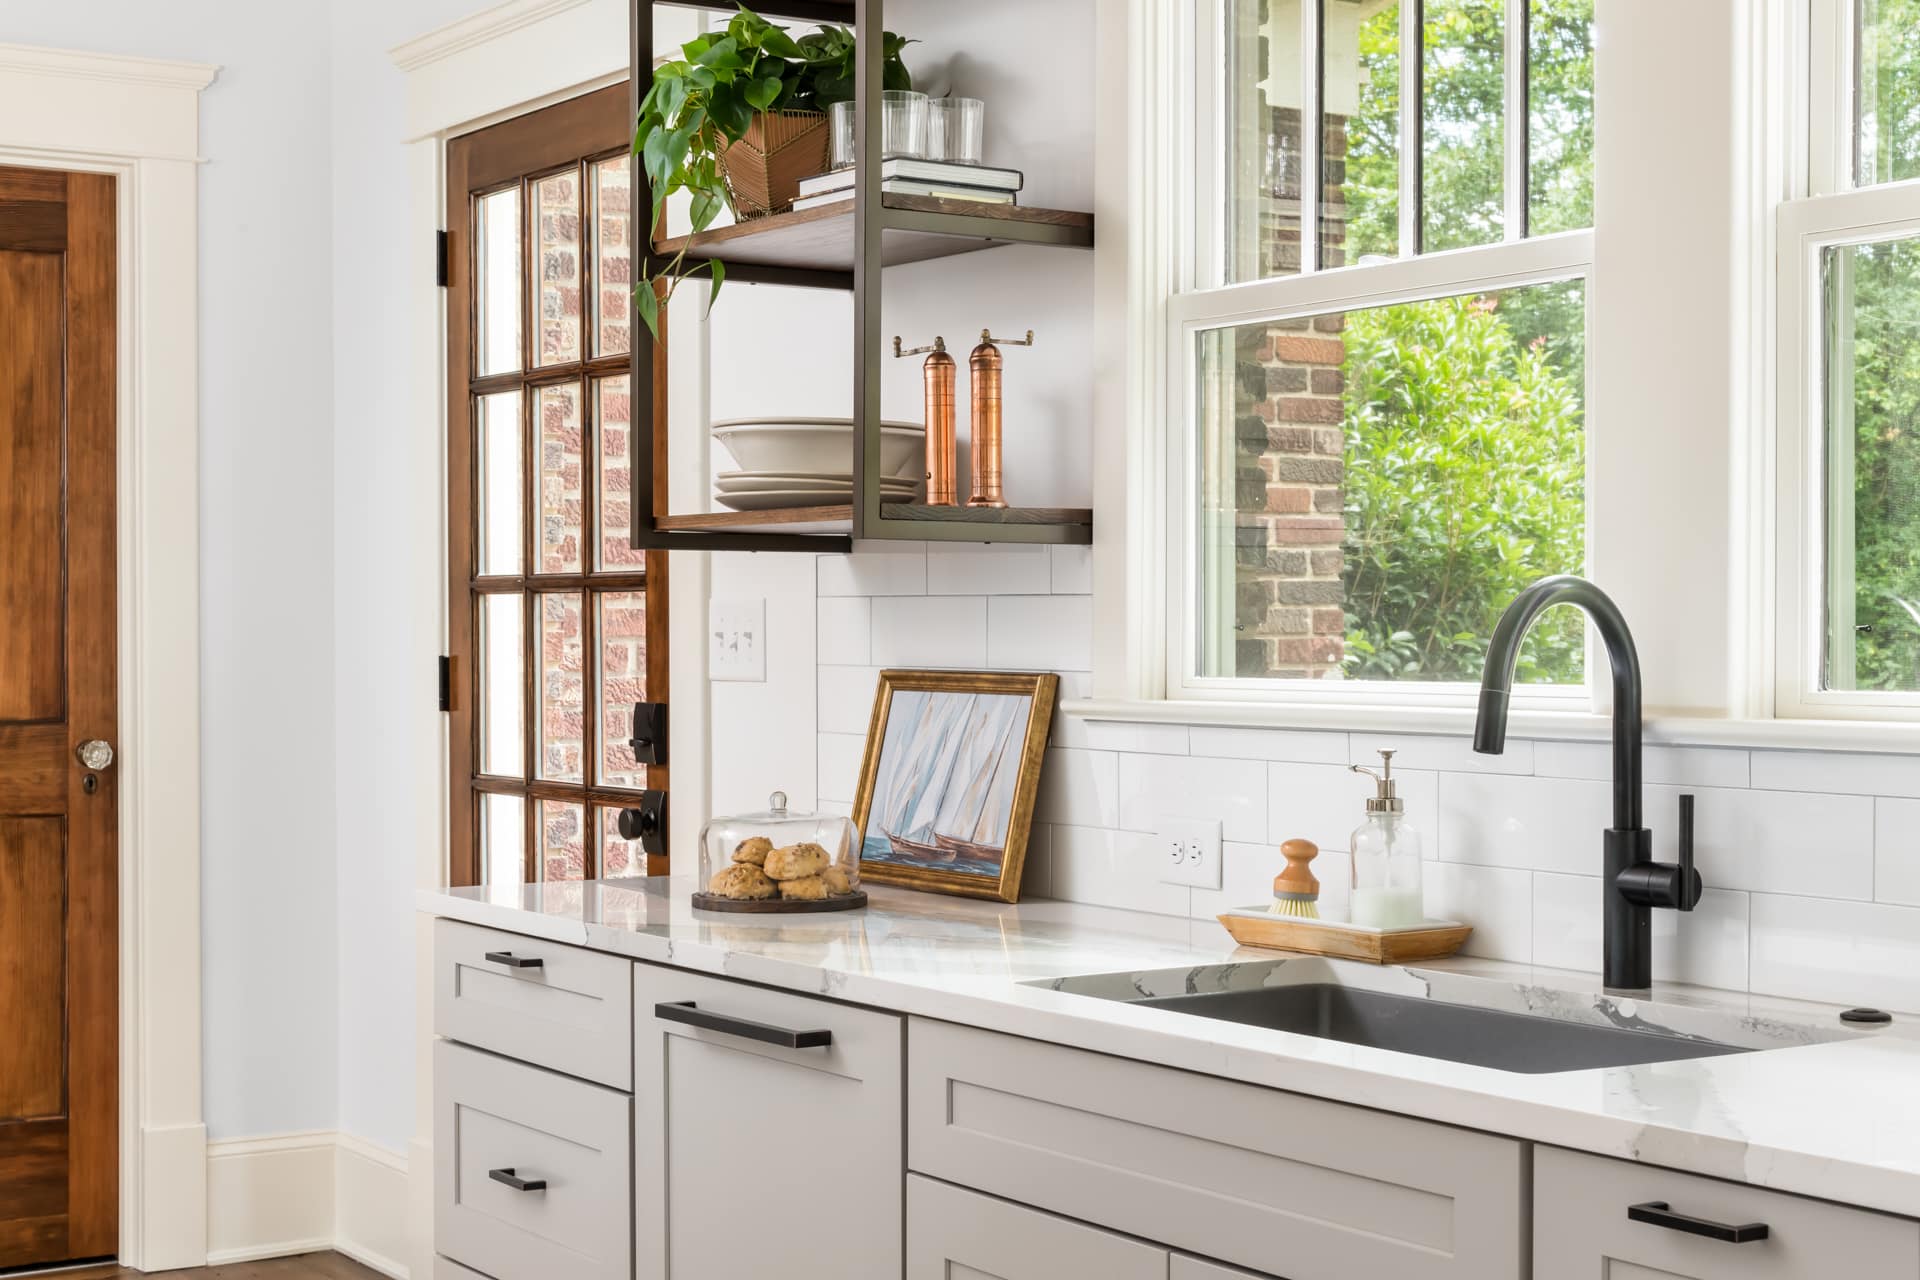 Traditional kitchen design with light gray cabinets, open shelves, granite countertops, and natural wood stained doors.